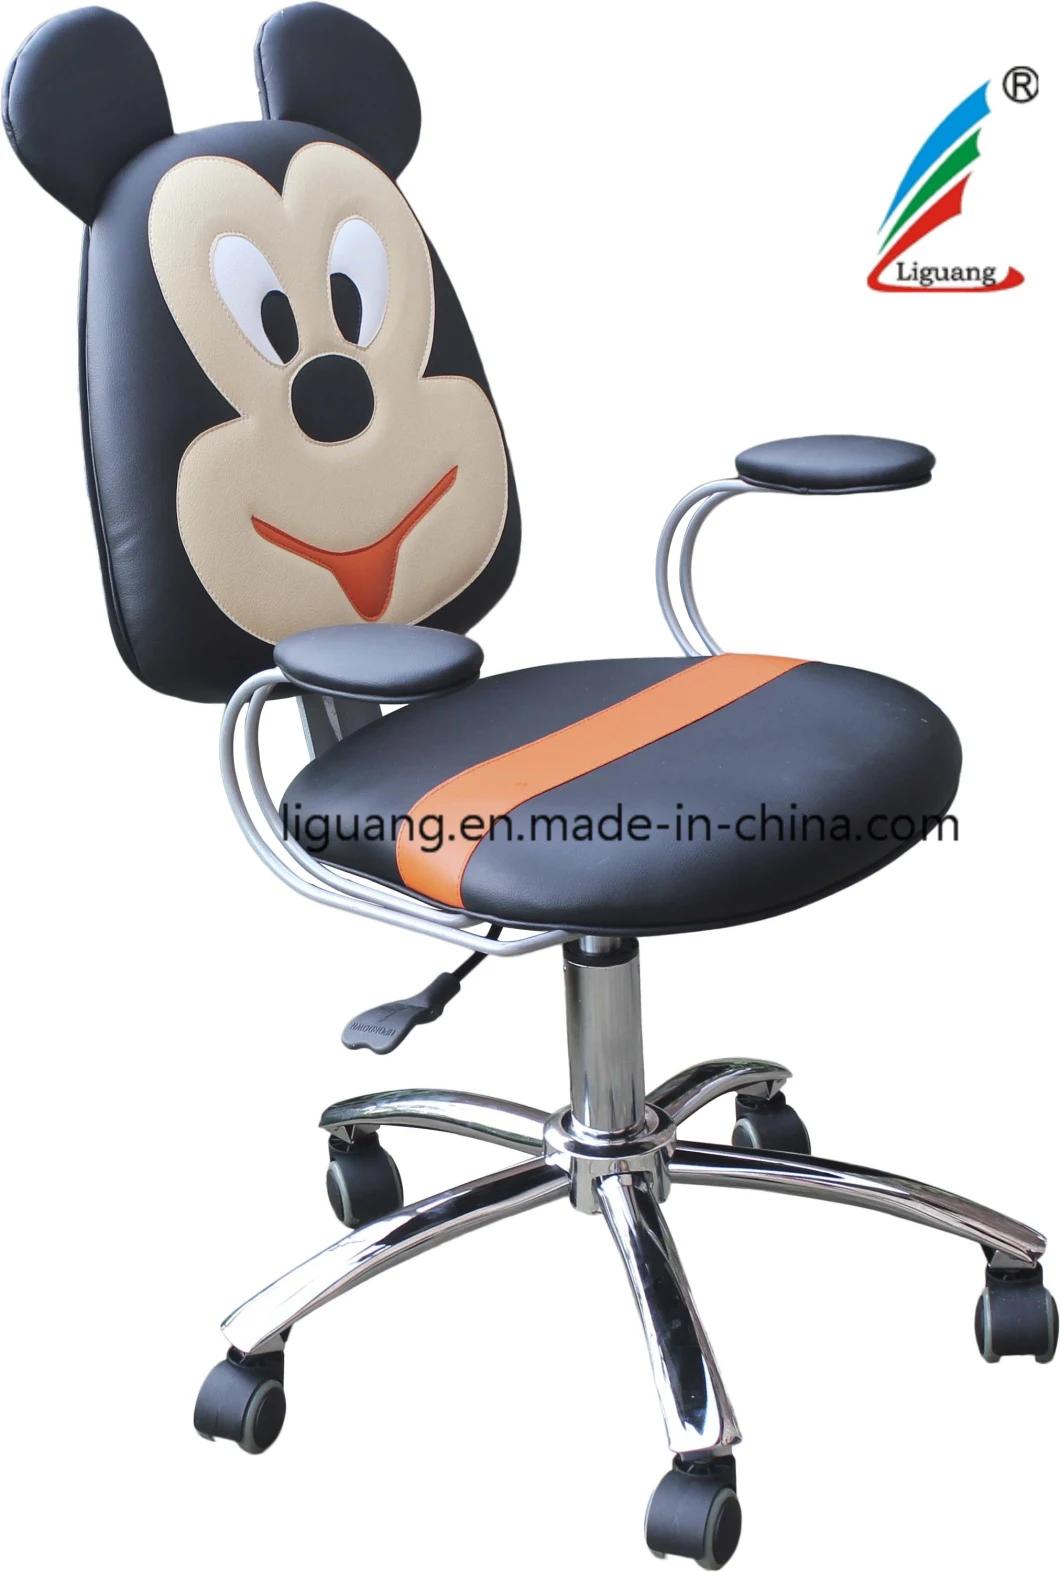 Manufacturers Direct Sales of New Leather Chairs